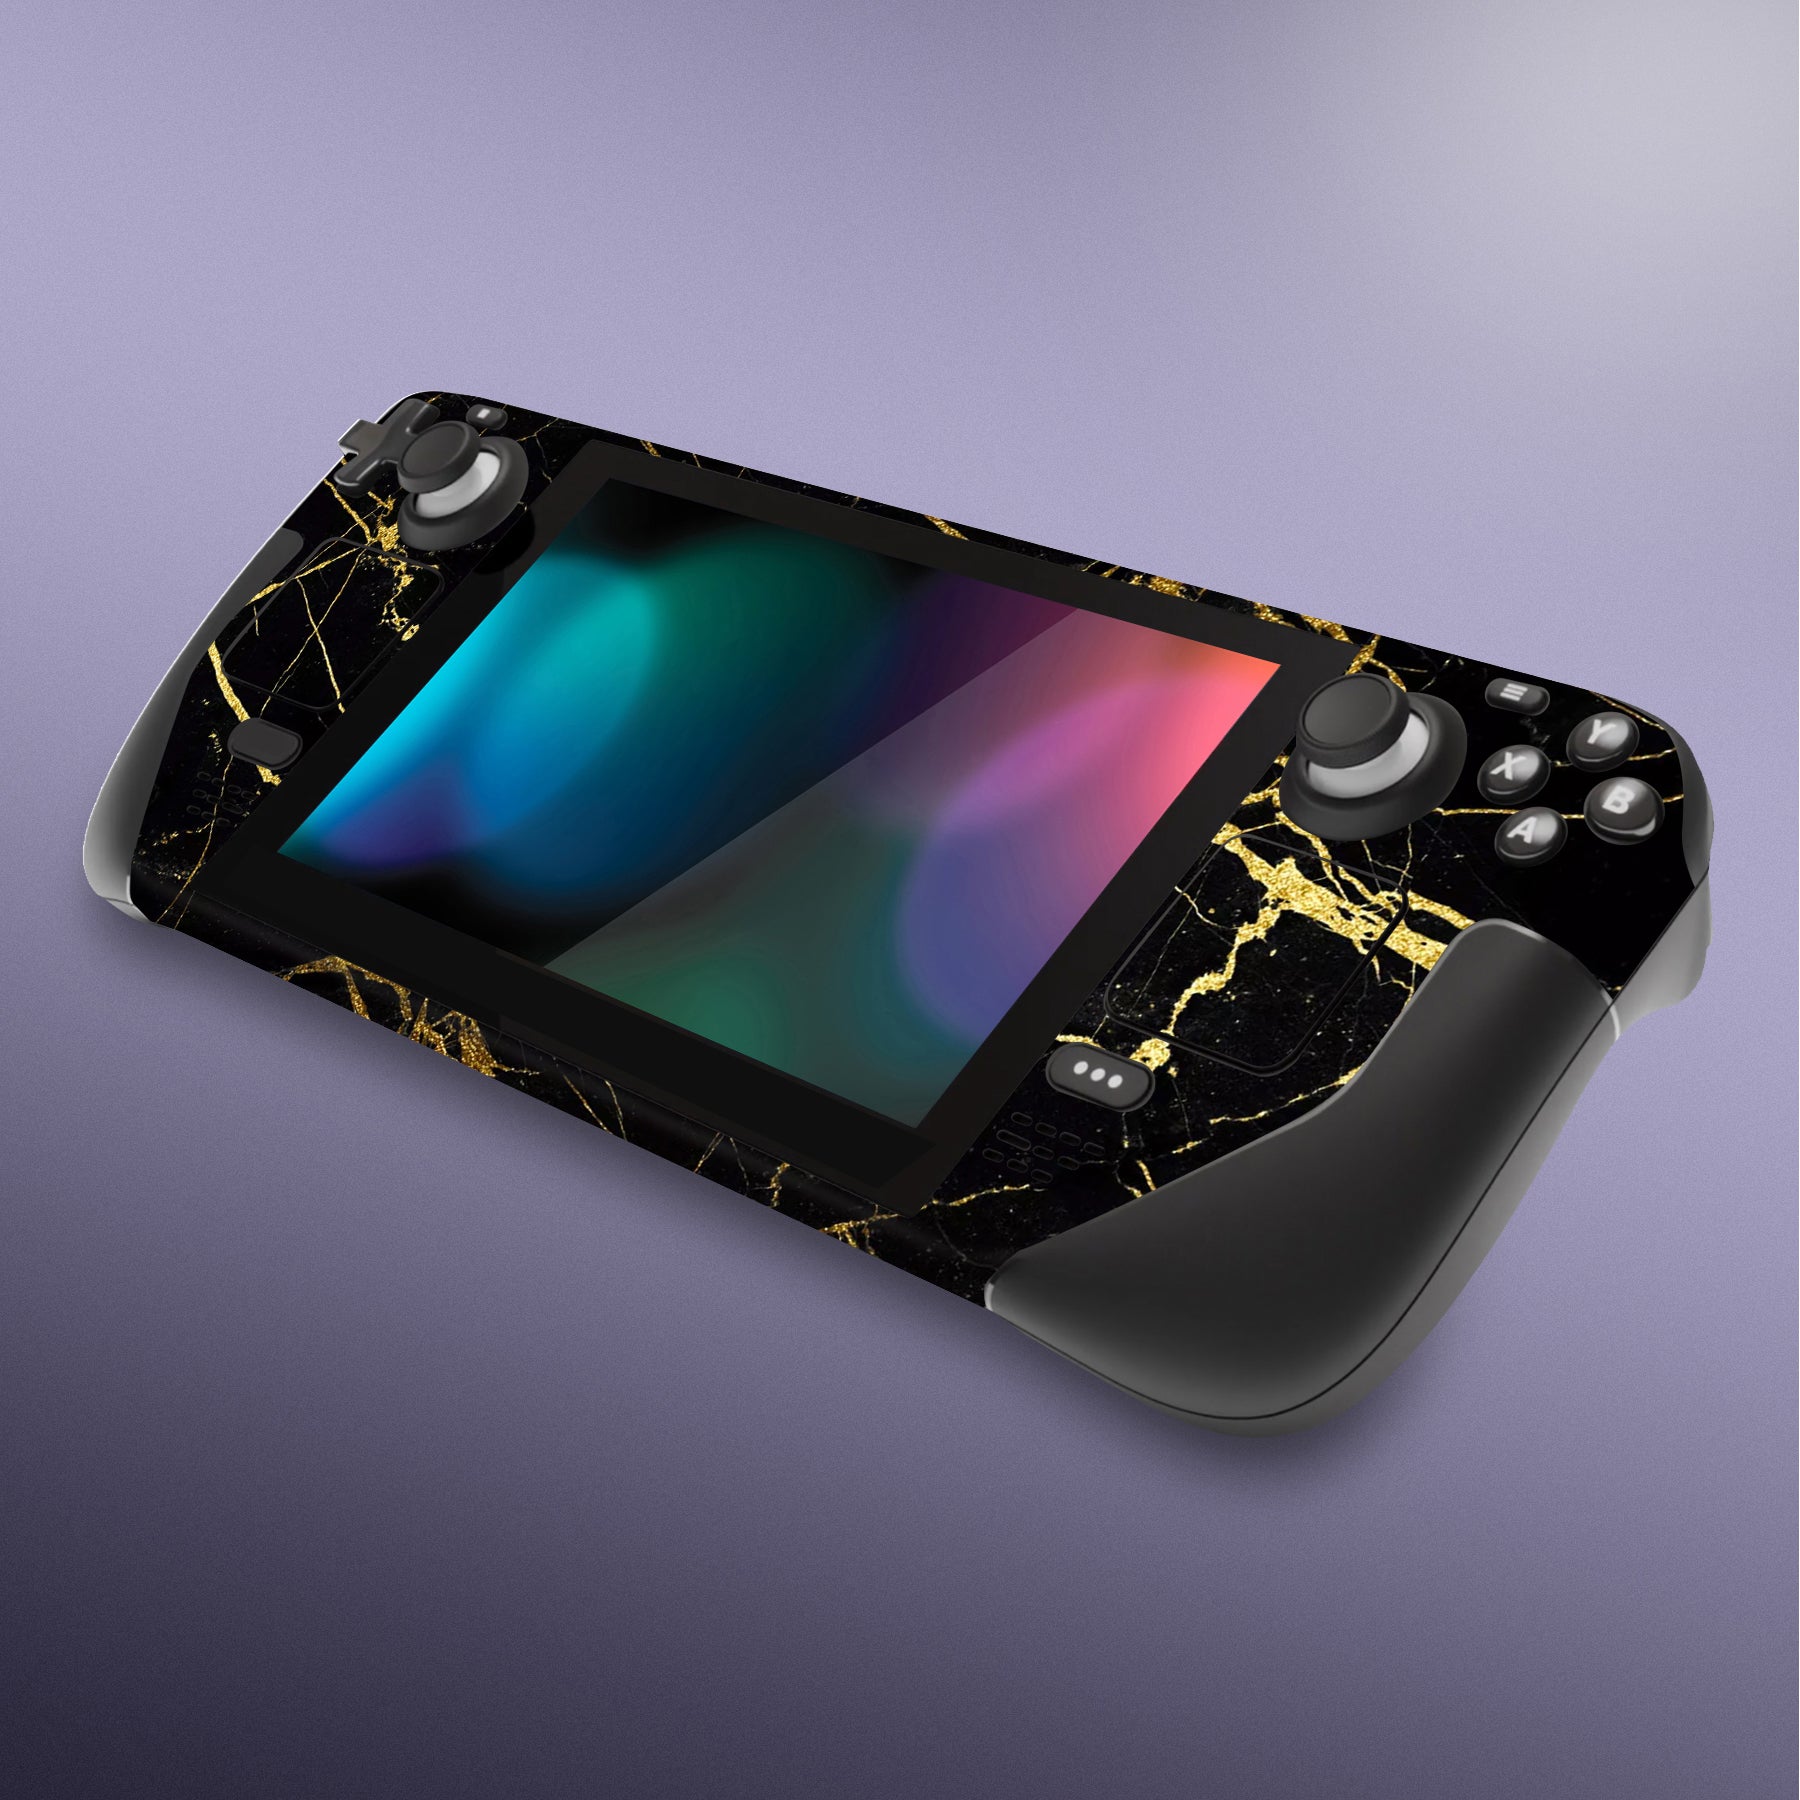 Sony PS4 Controller Skin - Black Gold Marble by Marble Collection